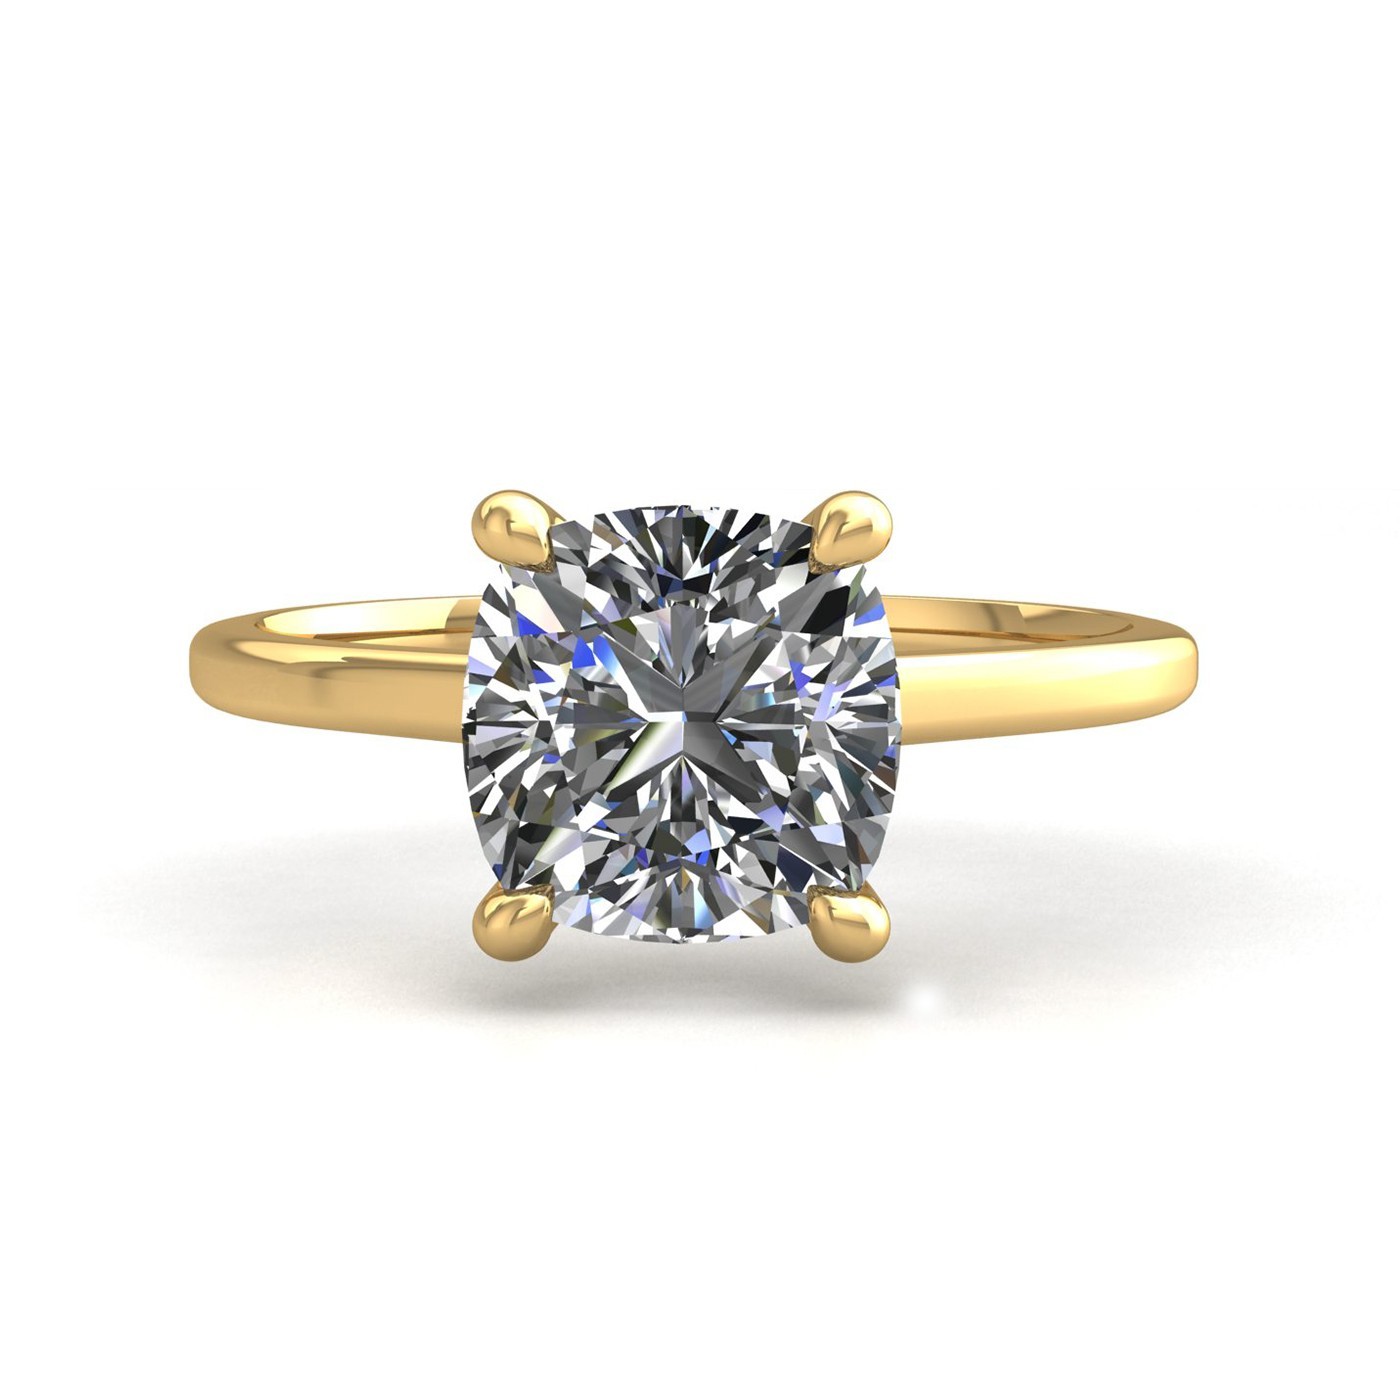 18k yellow gold 2.5ct 4 prongs solitaire cushion cut diamond engagement ring with whisper thin band Photos & images